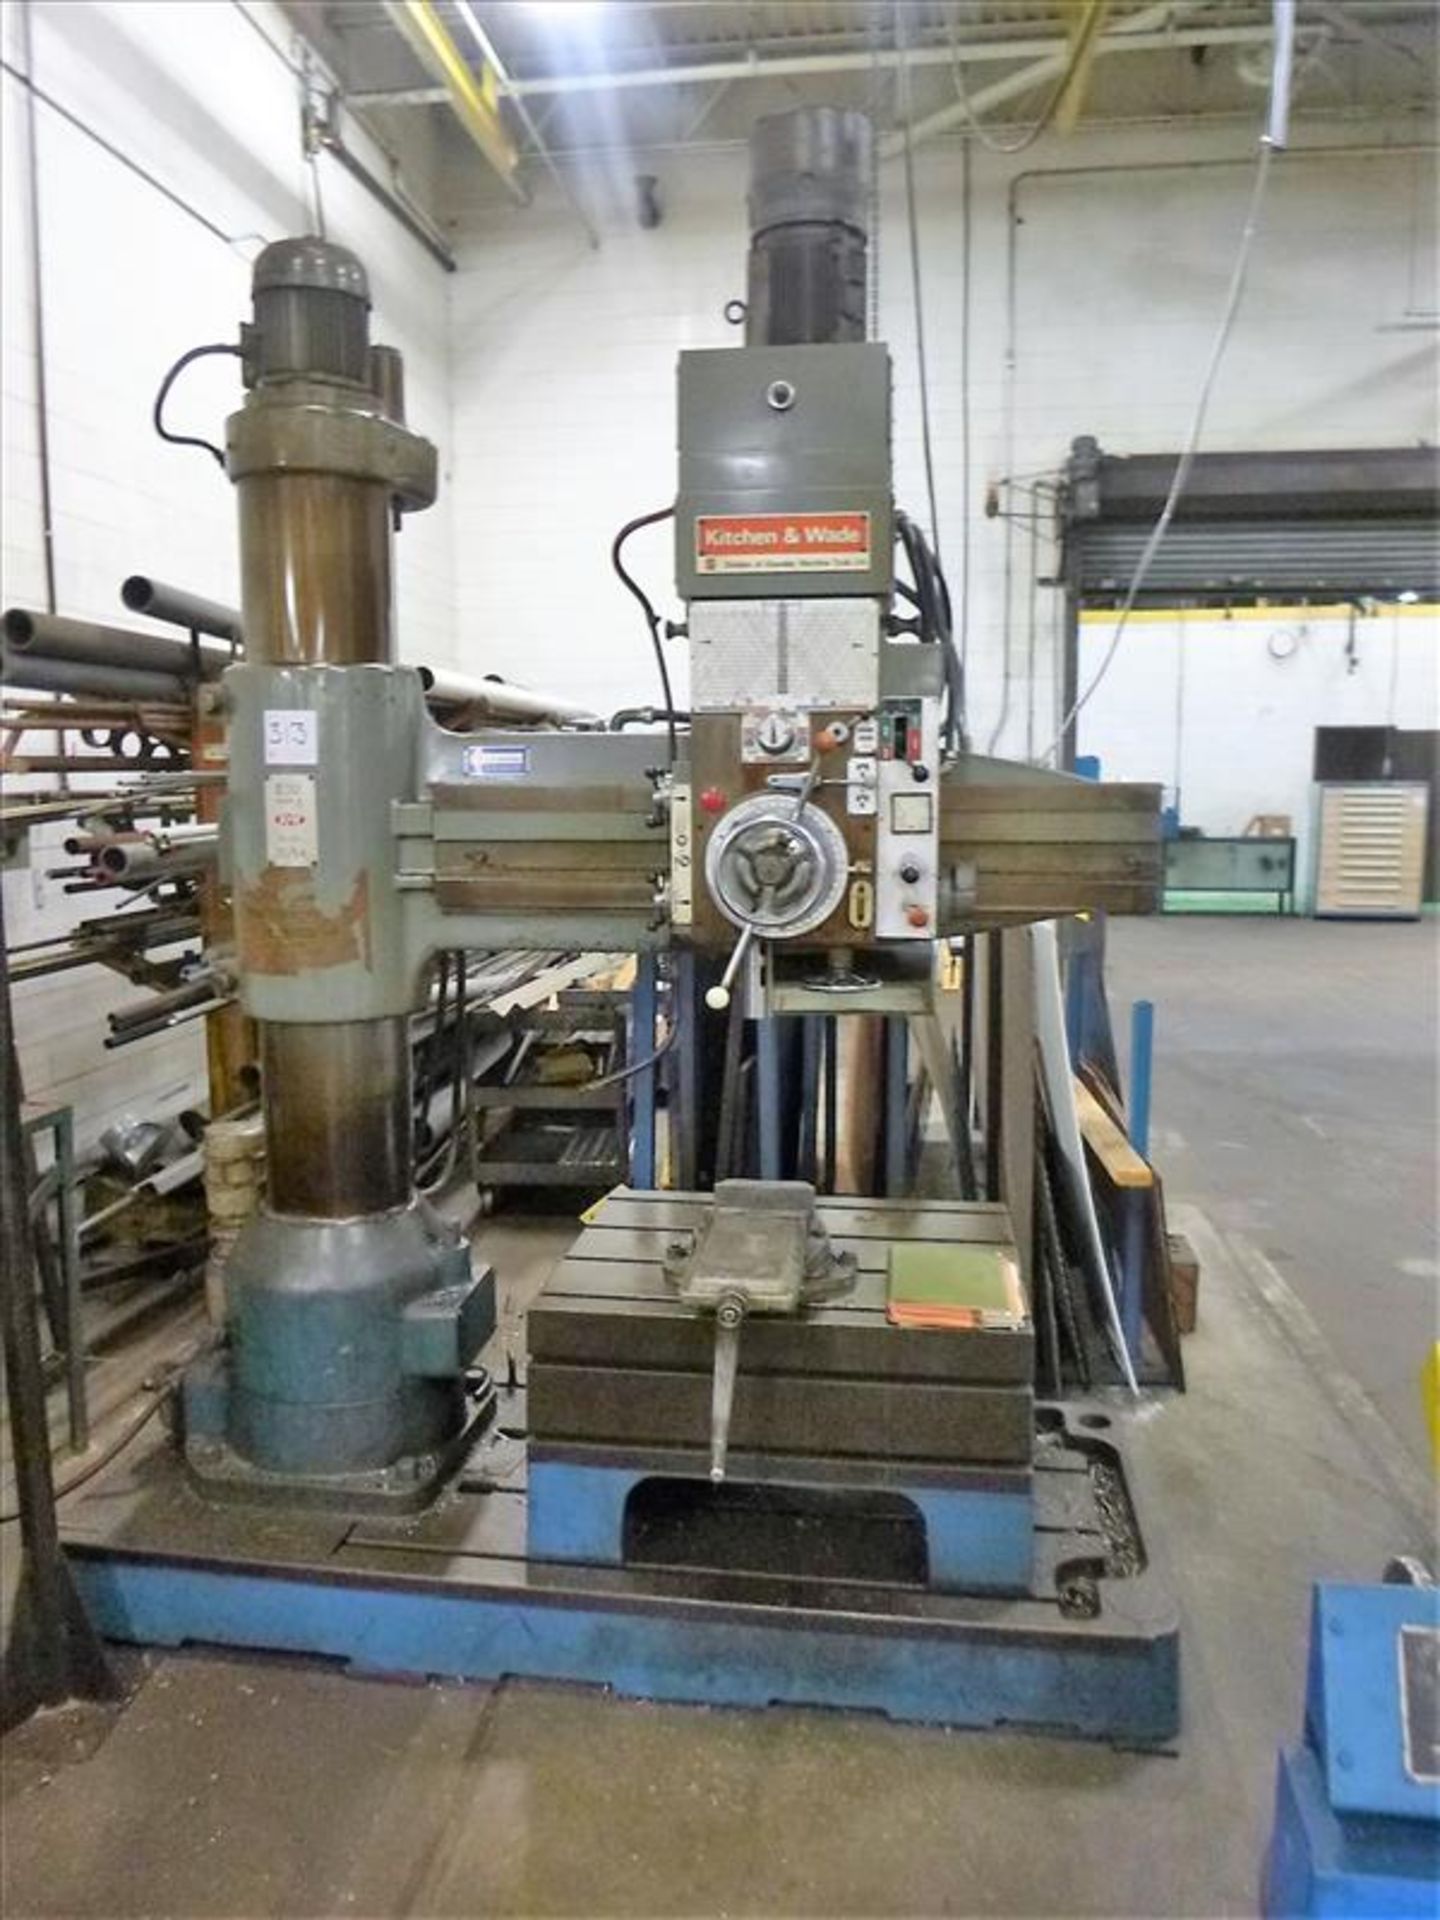 KITCHEN & WADE E32 MARK II 12/54 Radial Arm Drill - Image 2 of 6